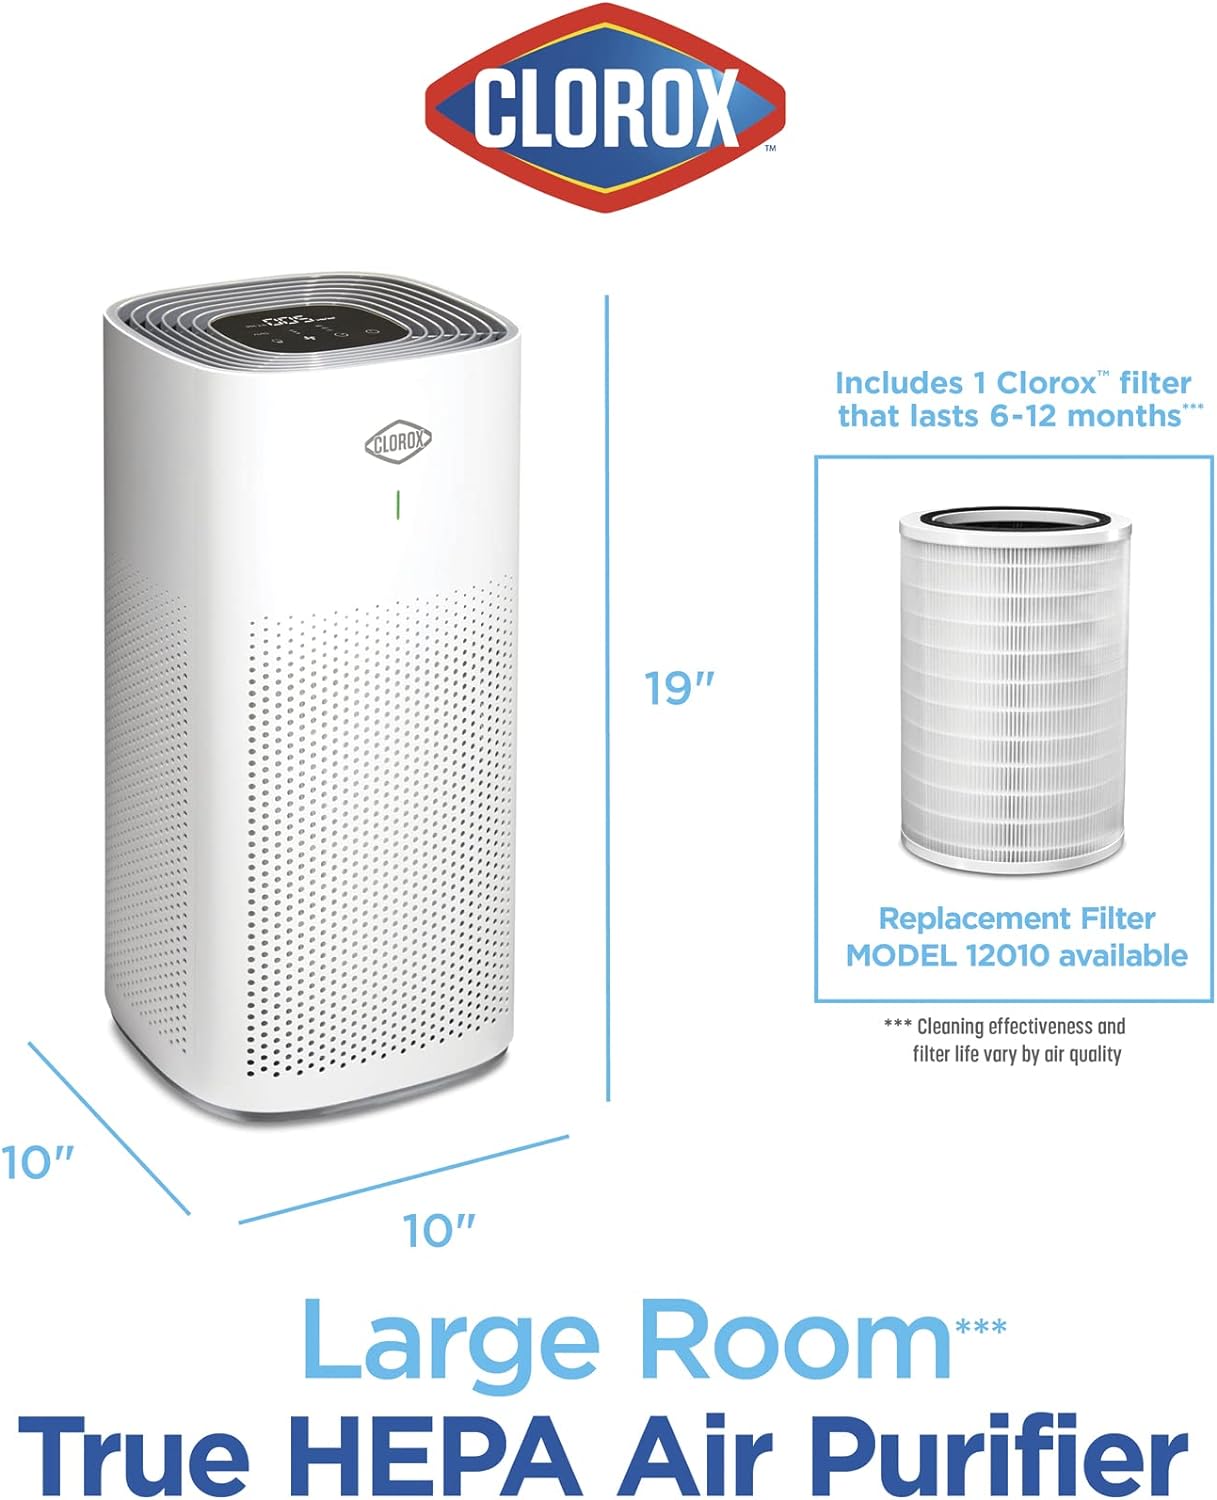 Perspective: Clorox Air Purifiers for Home